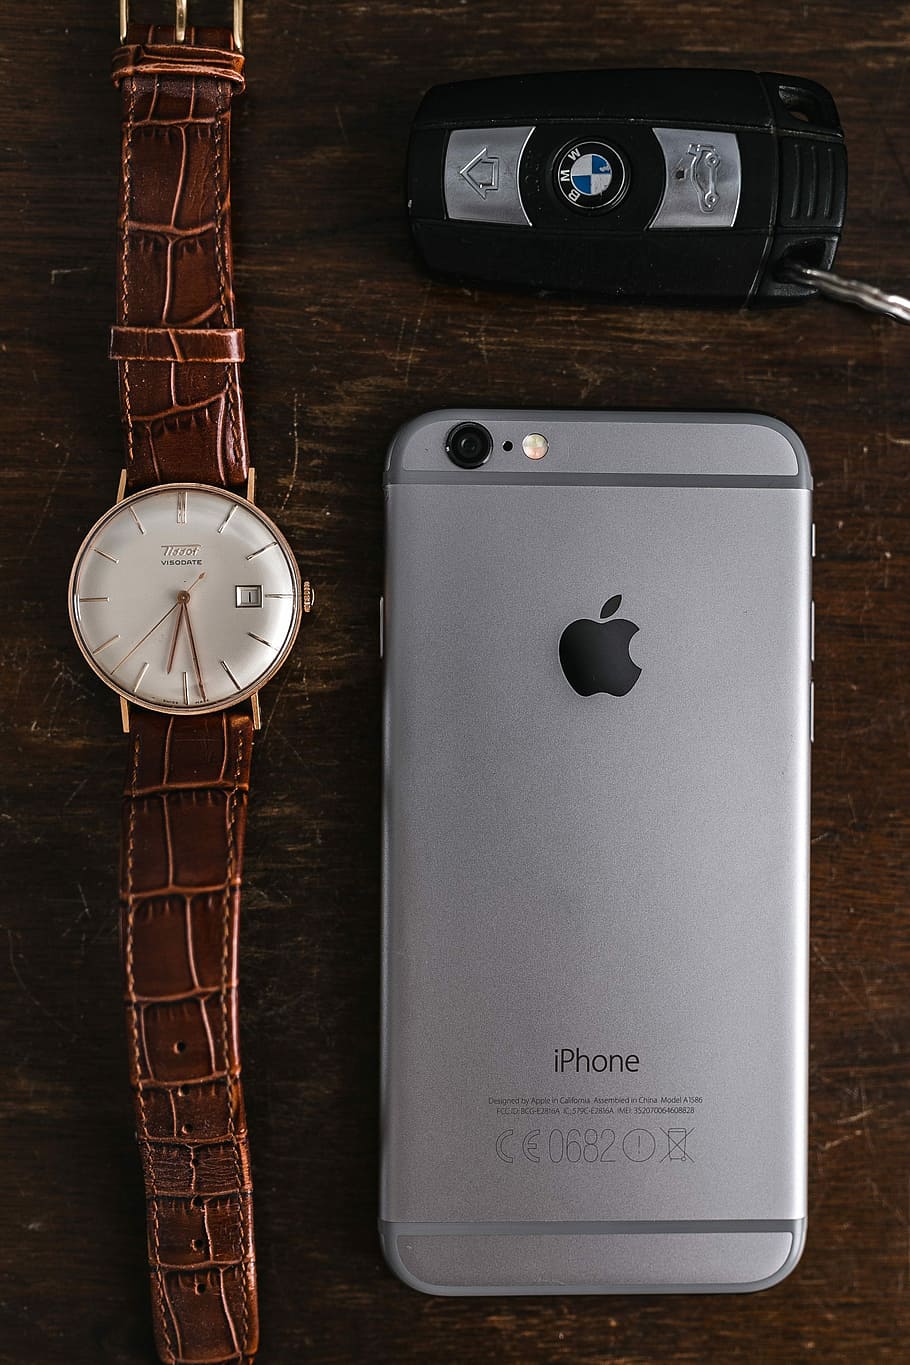 Apple iPhone 6 and Vintage watch on a brown leather wallet, technology